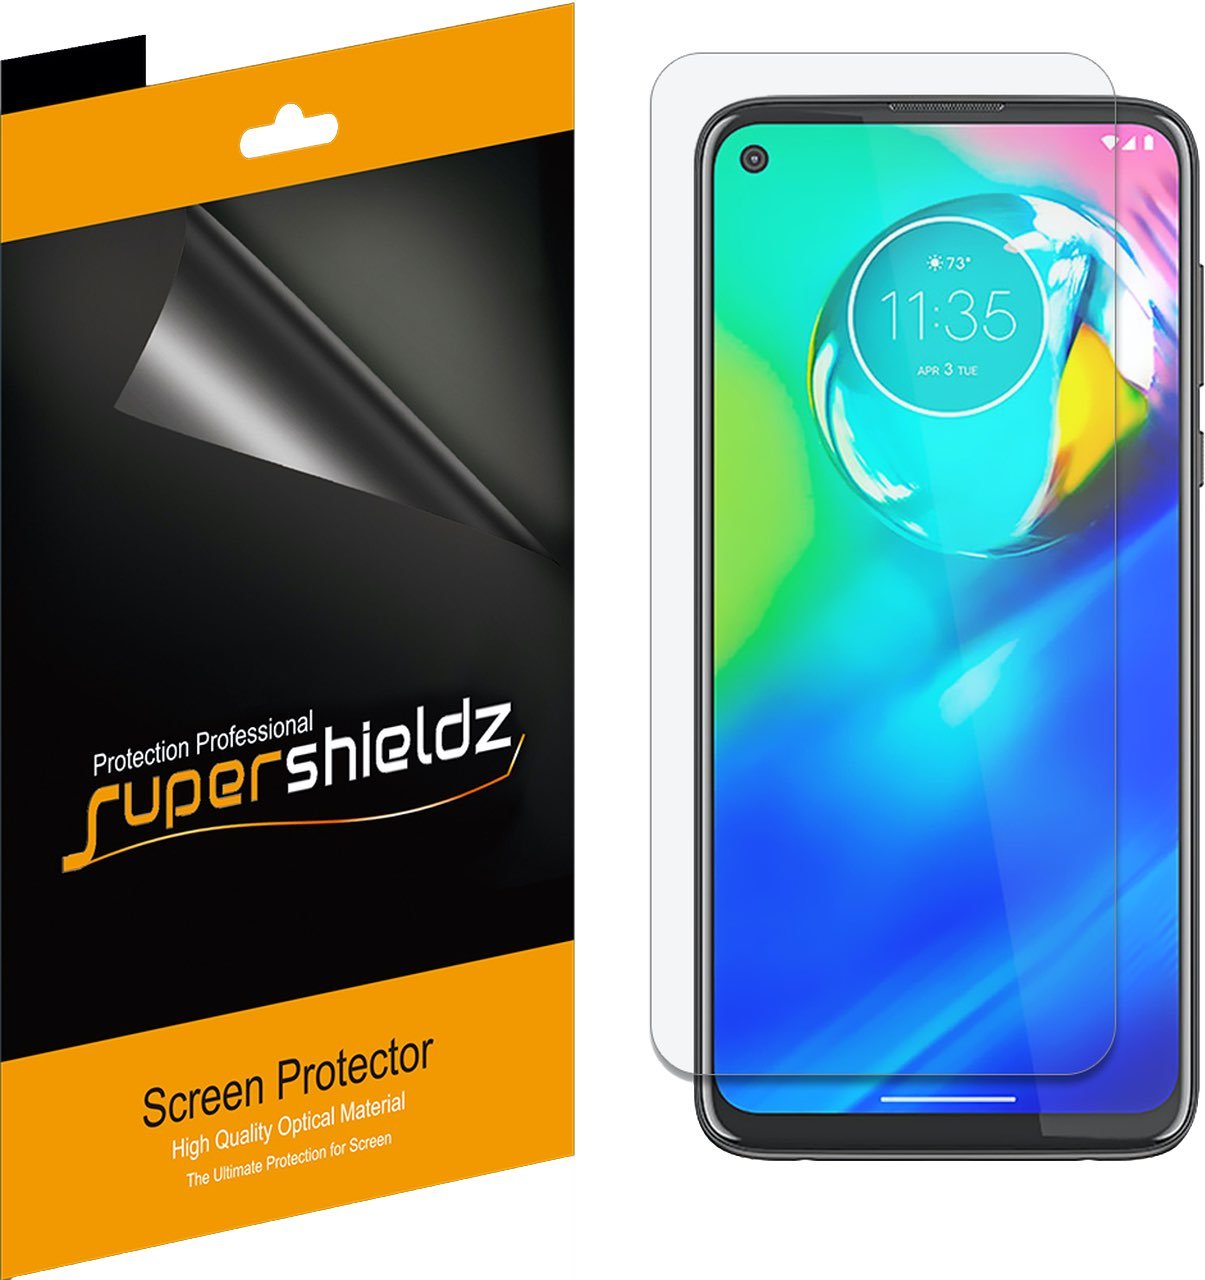 Best Moto G Power (2020) screen protectors 2021 Android